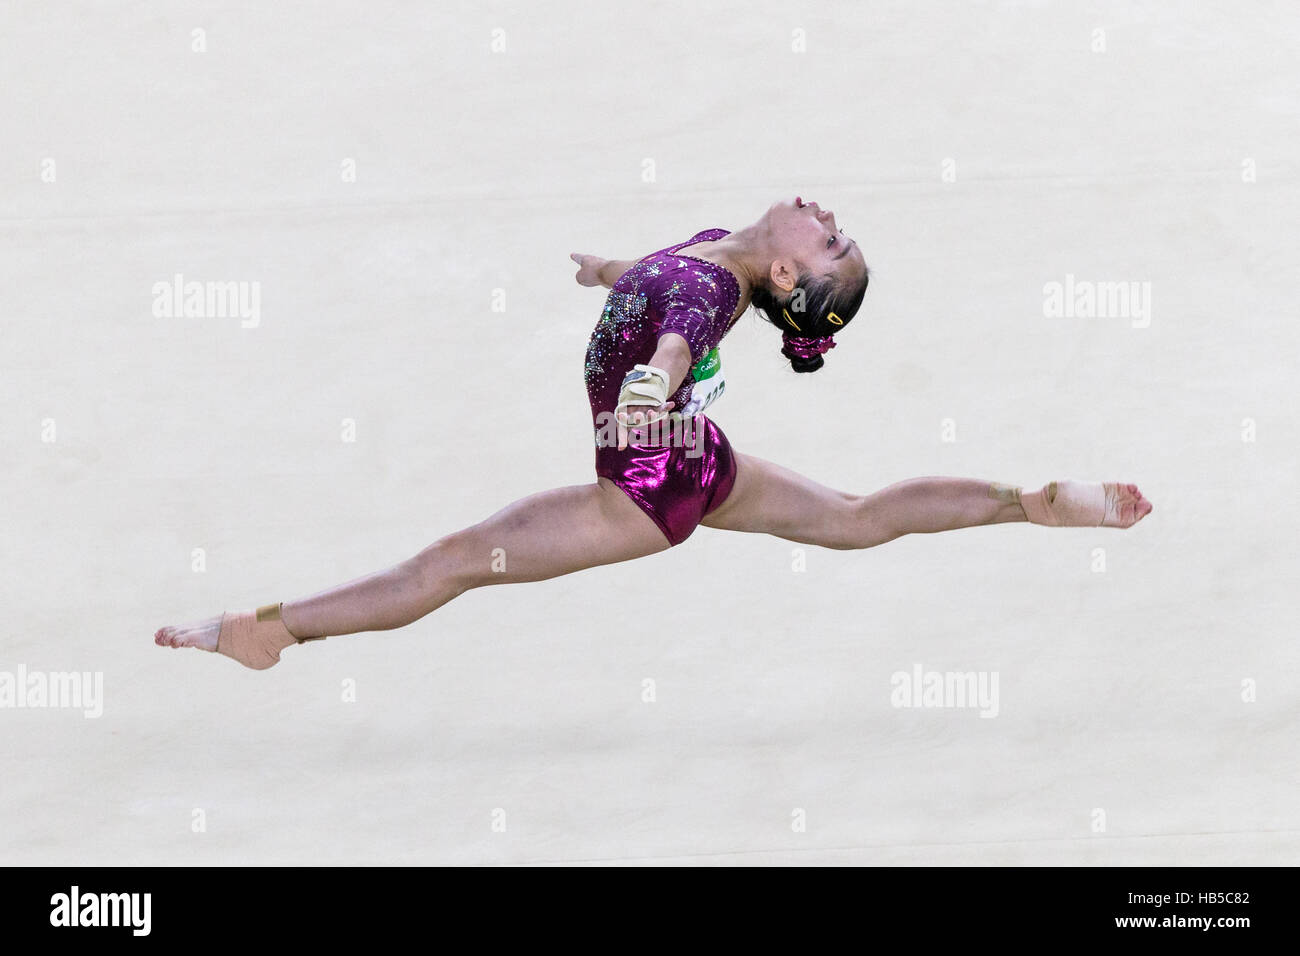 Rio de Janeiro, Brazil. 9 August 2016.  Chunsong Shang (CHN) performs the floor exercise dring team competition at the 2016 Olympic Summer Games. ©Pau Stock Photo